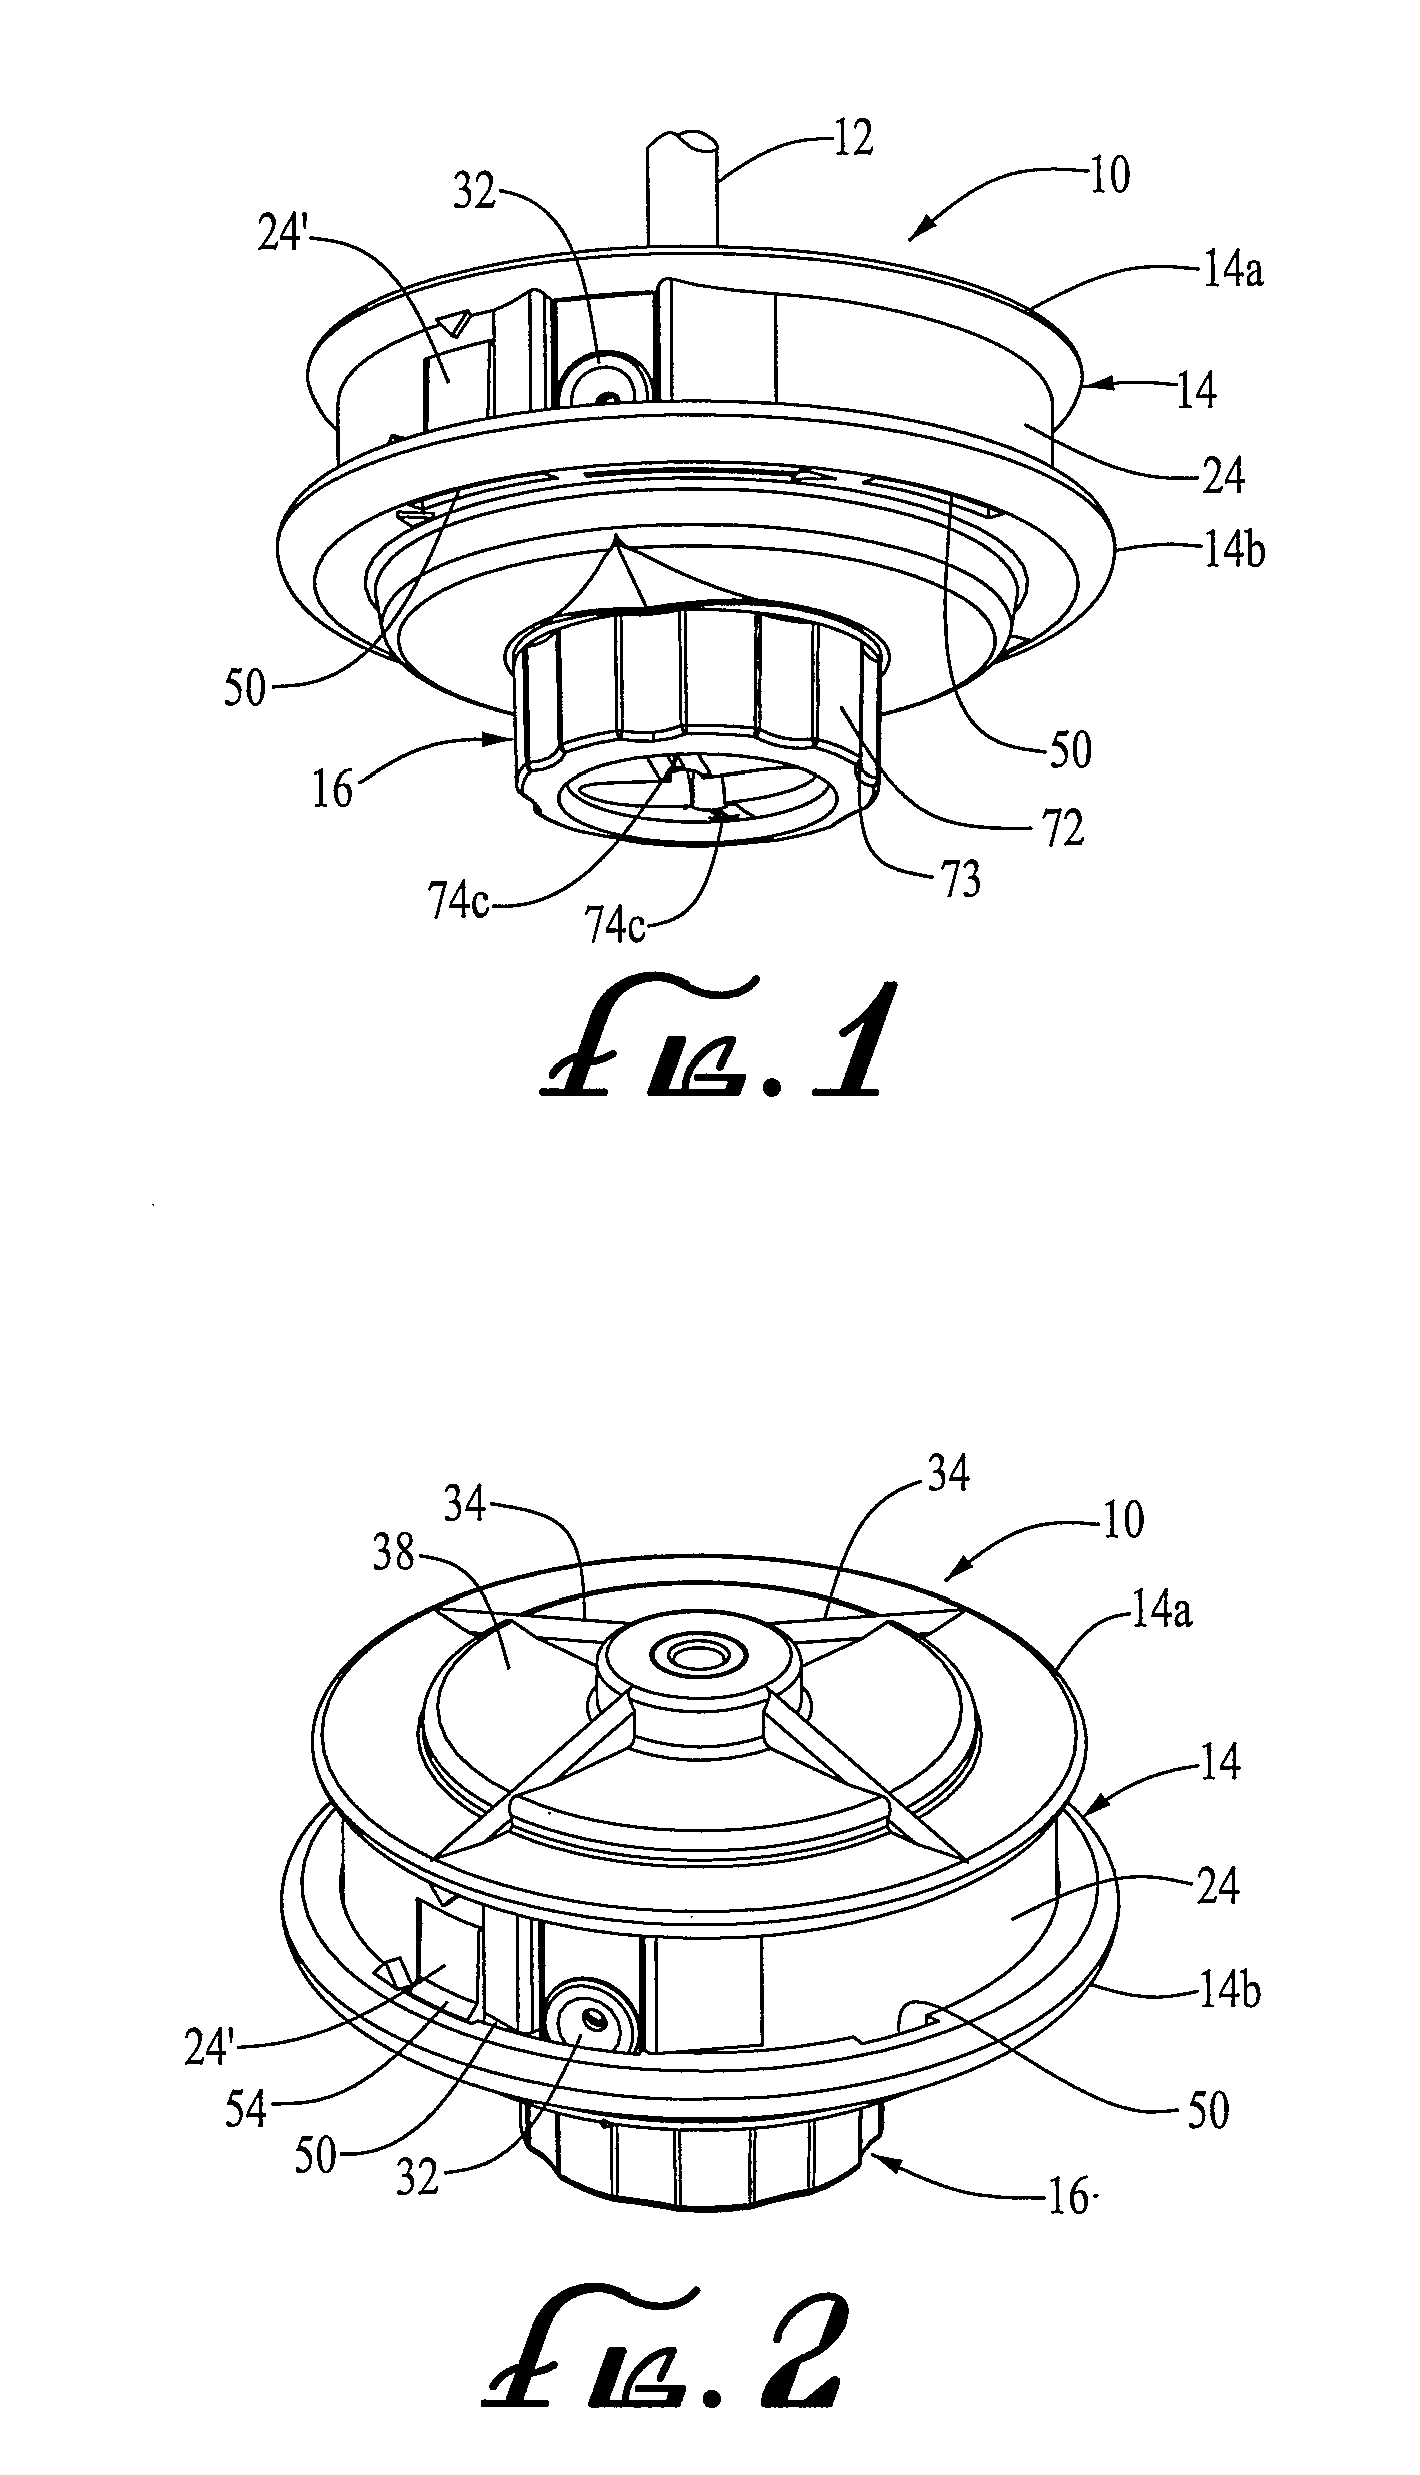 Trimmer head spool for use in flexible line rotary trimmer heads having improved line loading mechanism